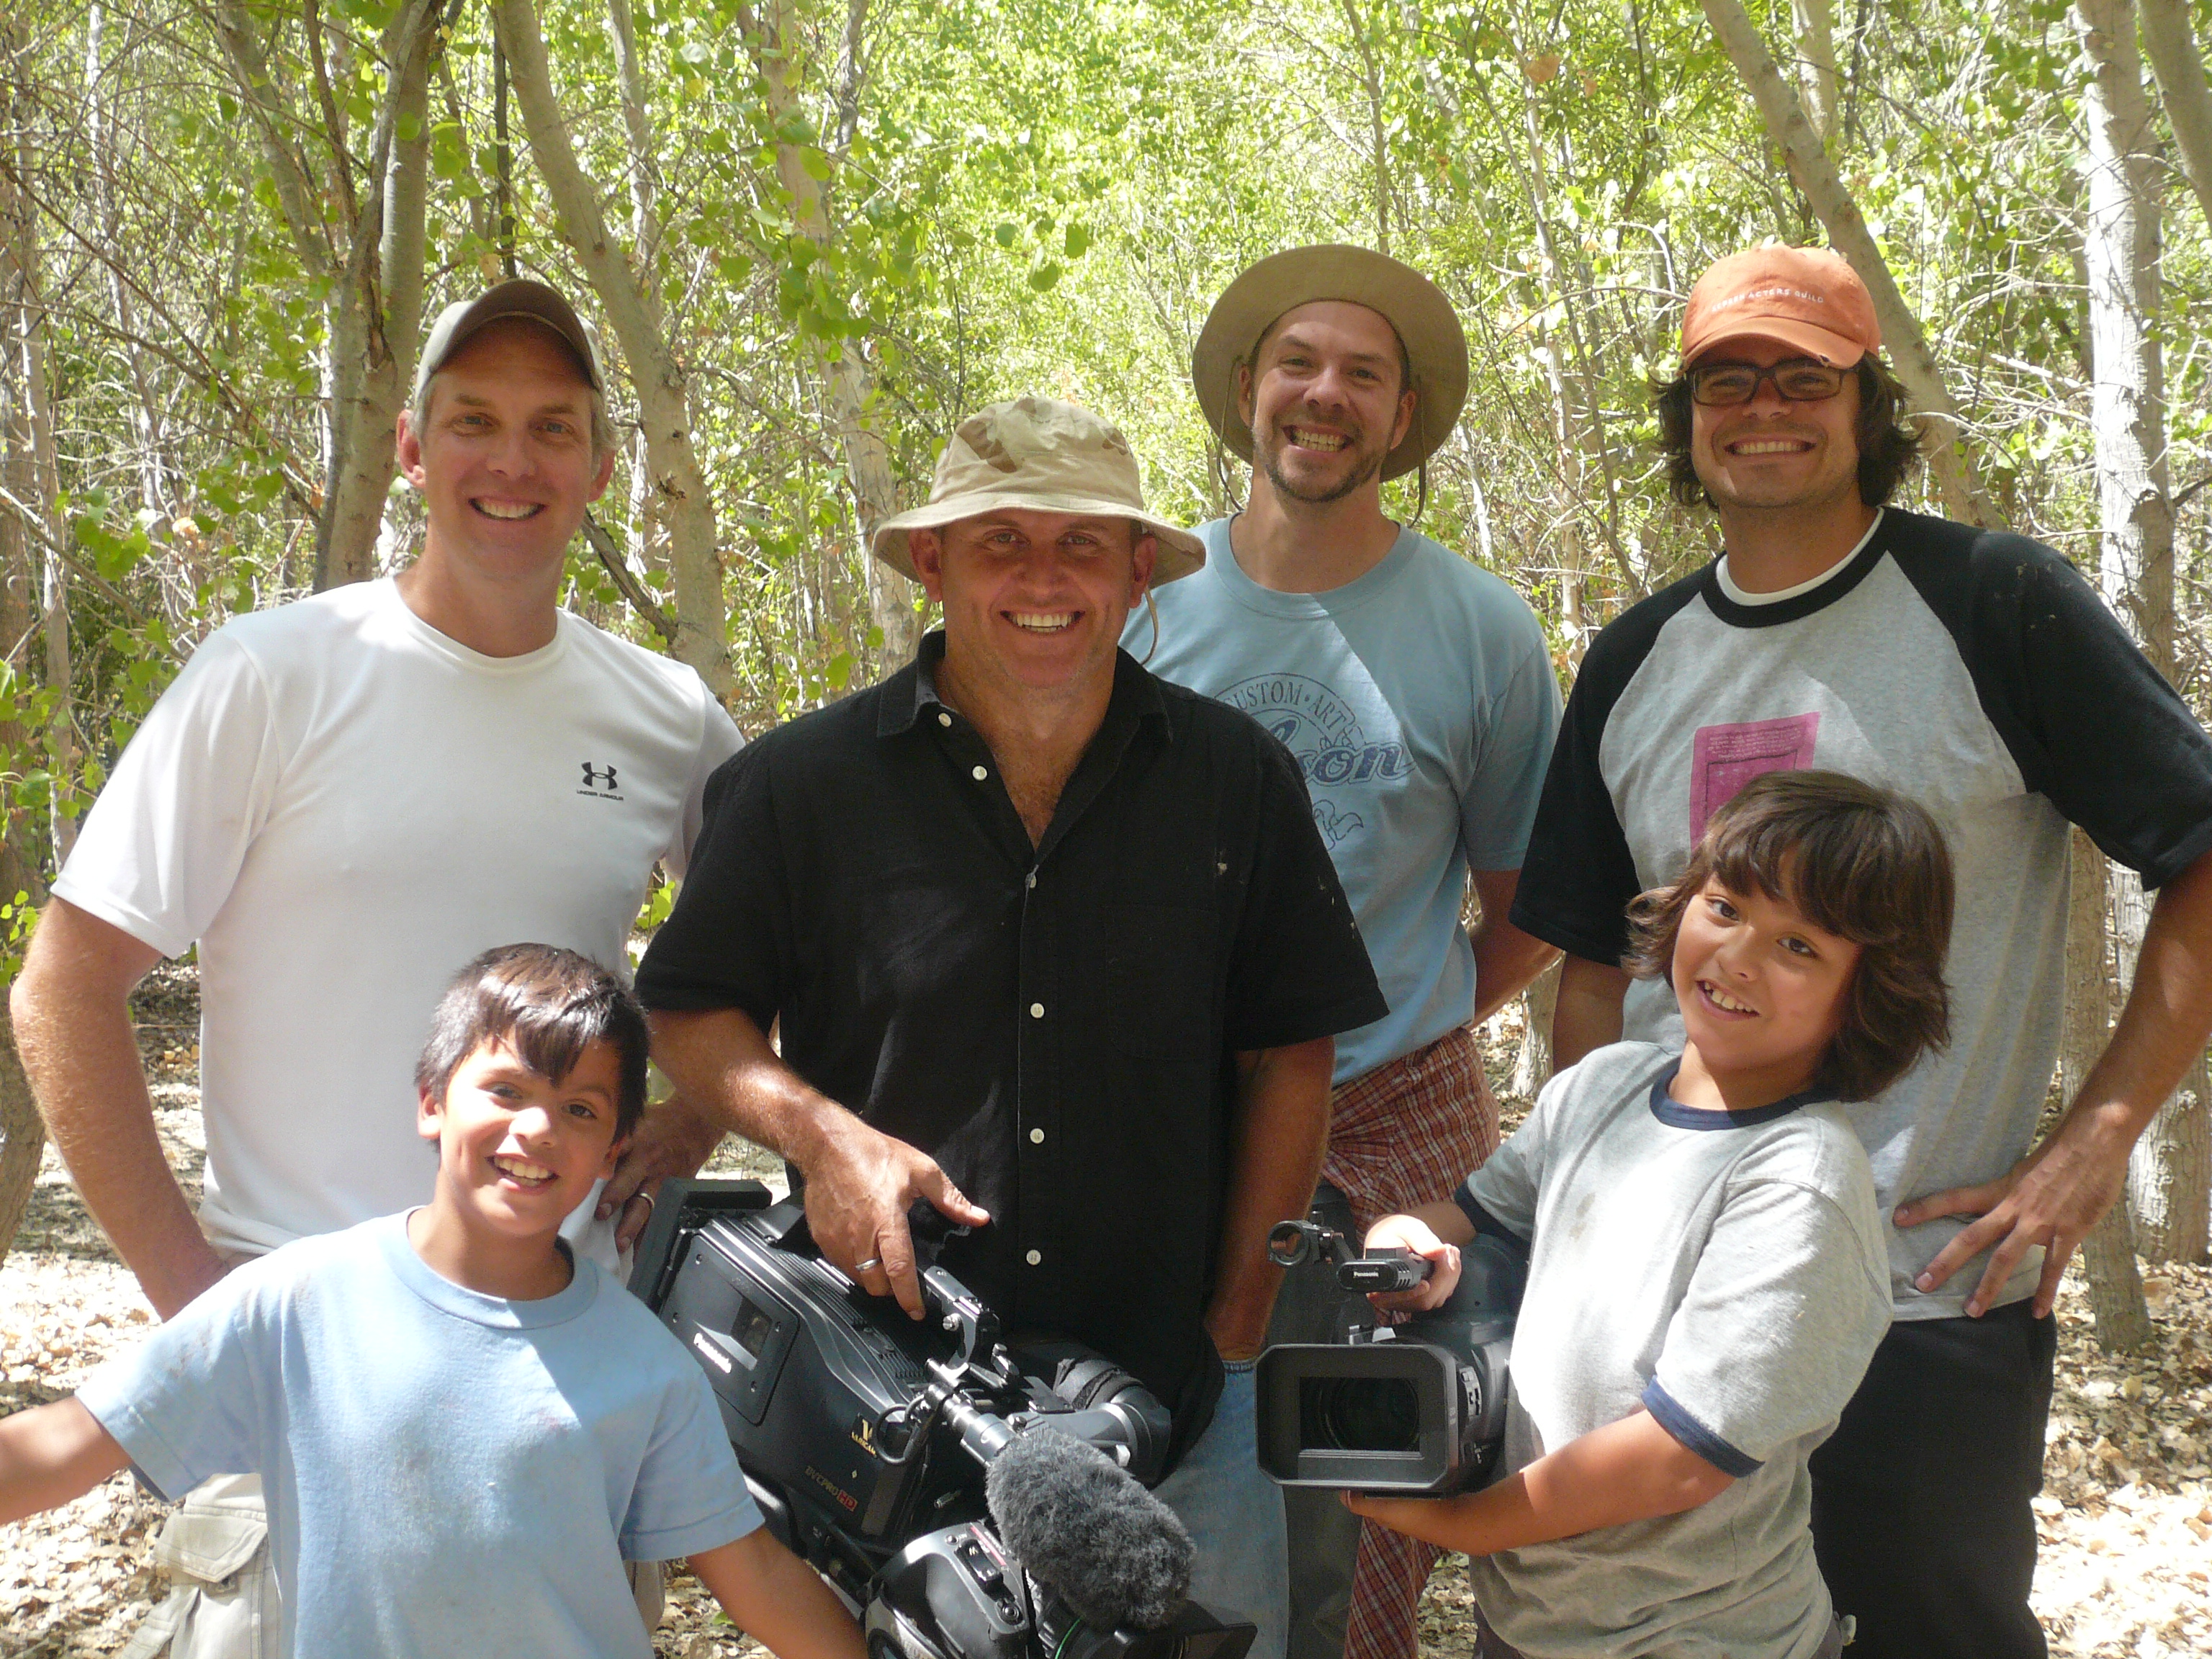 National Geographic 3- Hunter & Hunted: Dragon King & In the Jaws Episodes #12&16; Series #23-26-Komodo Dragons: (L-R) Geoff Luck-Dir, JR Landers, Chris-cameraman, Cole-2nd AD, JP-2nd Cameraman, Adrian Schemm holding camera